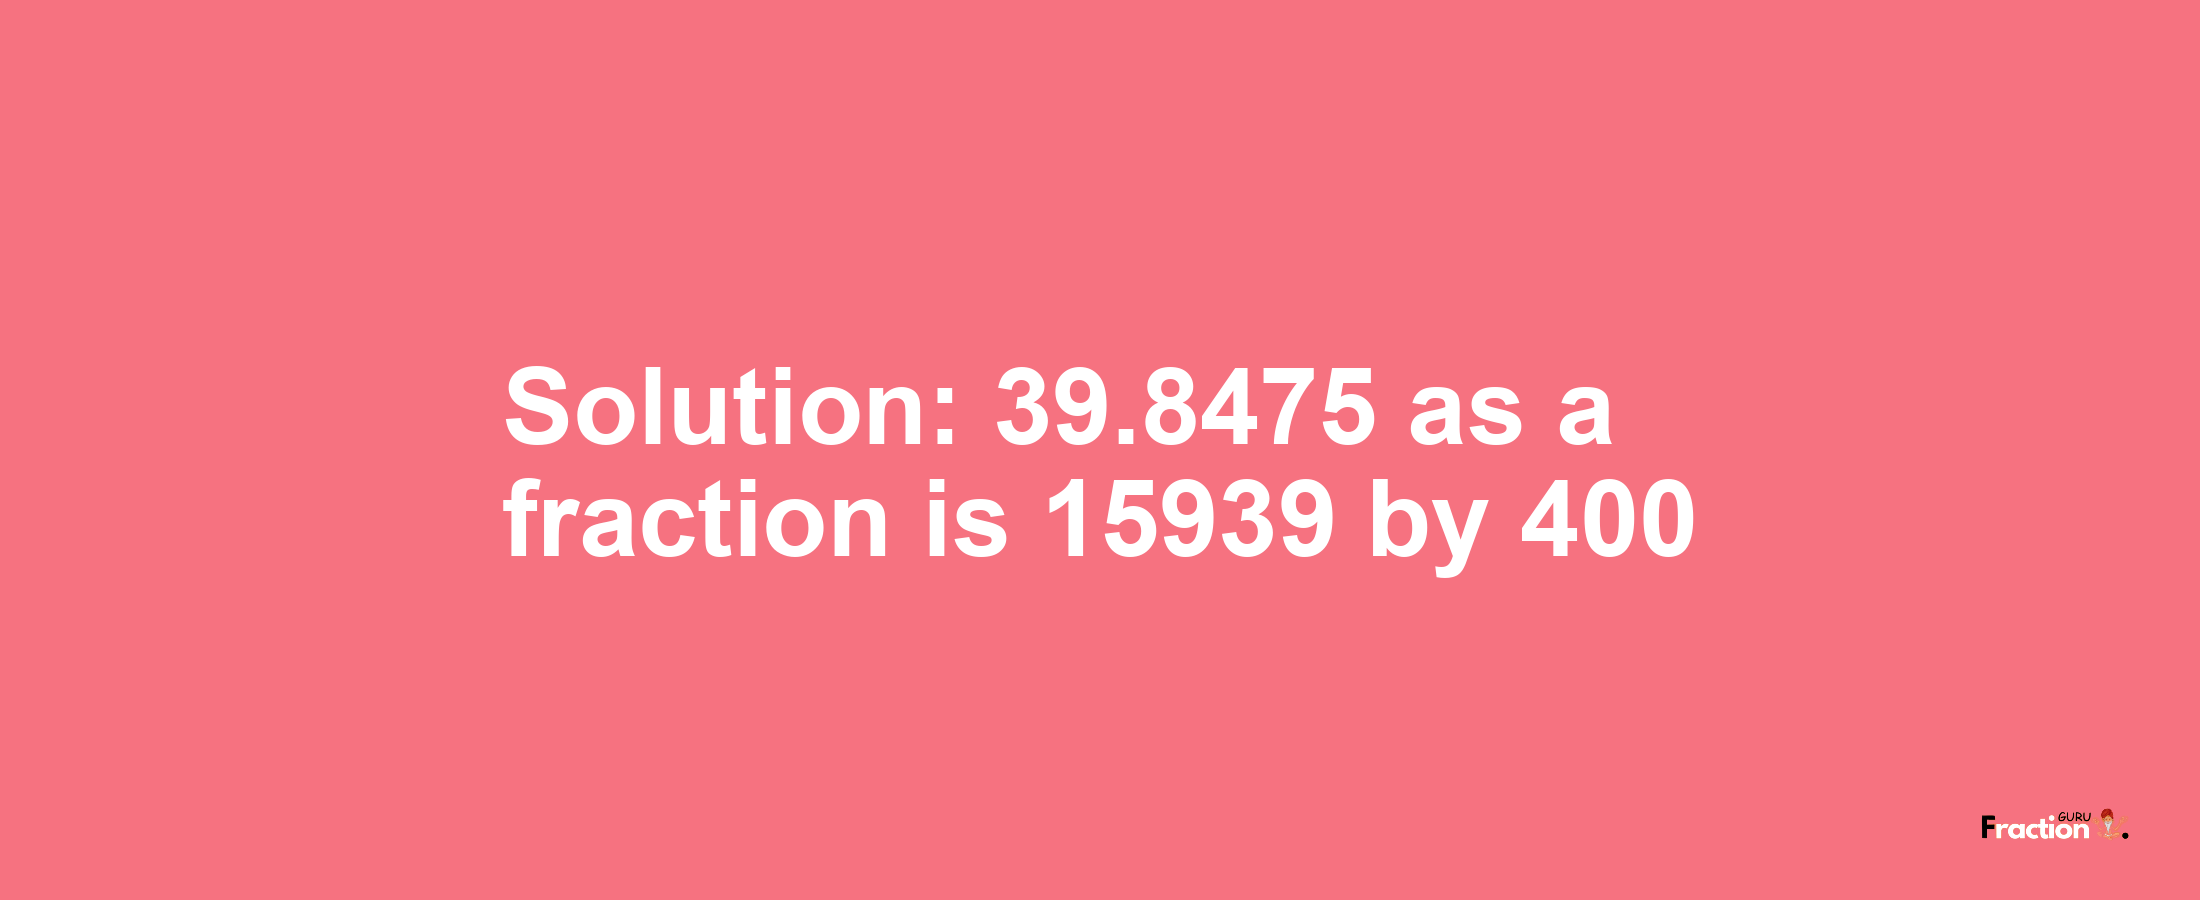 Solution:39.8475 as a fraction is 15939/400